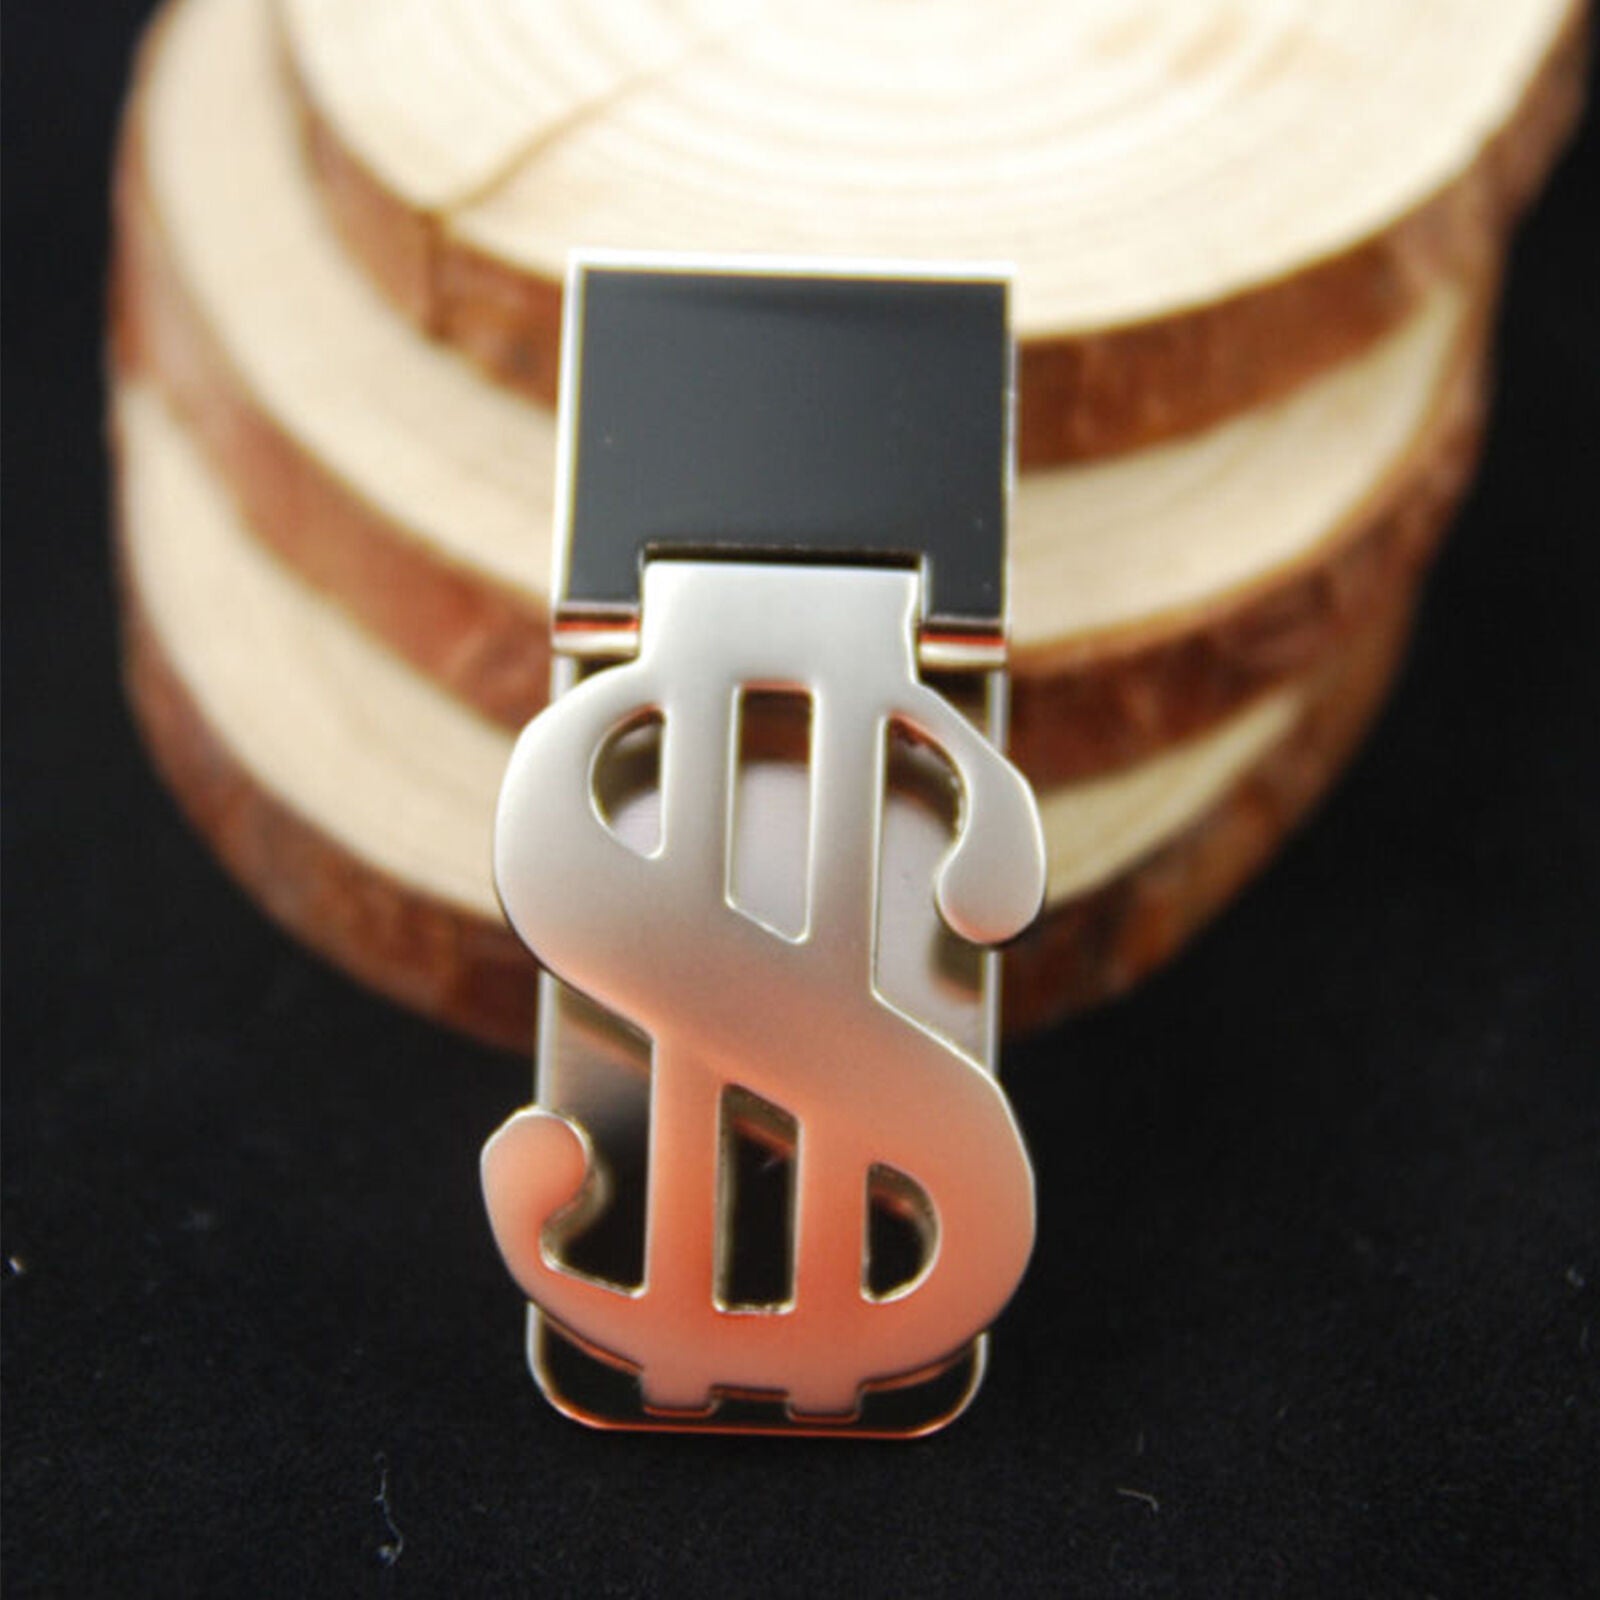 US Dollar Sign Stainless Steel Money Clip Personalized Name Engraving